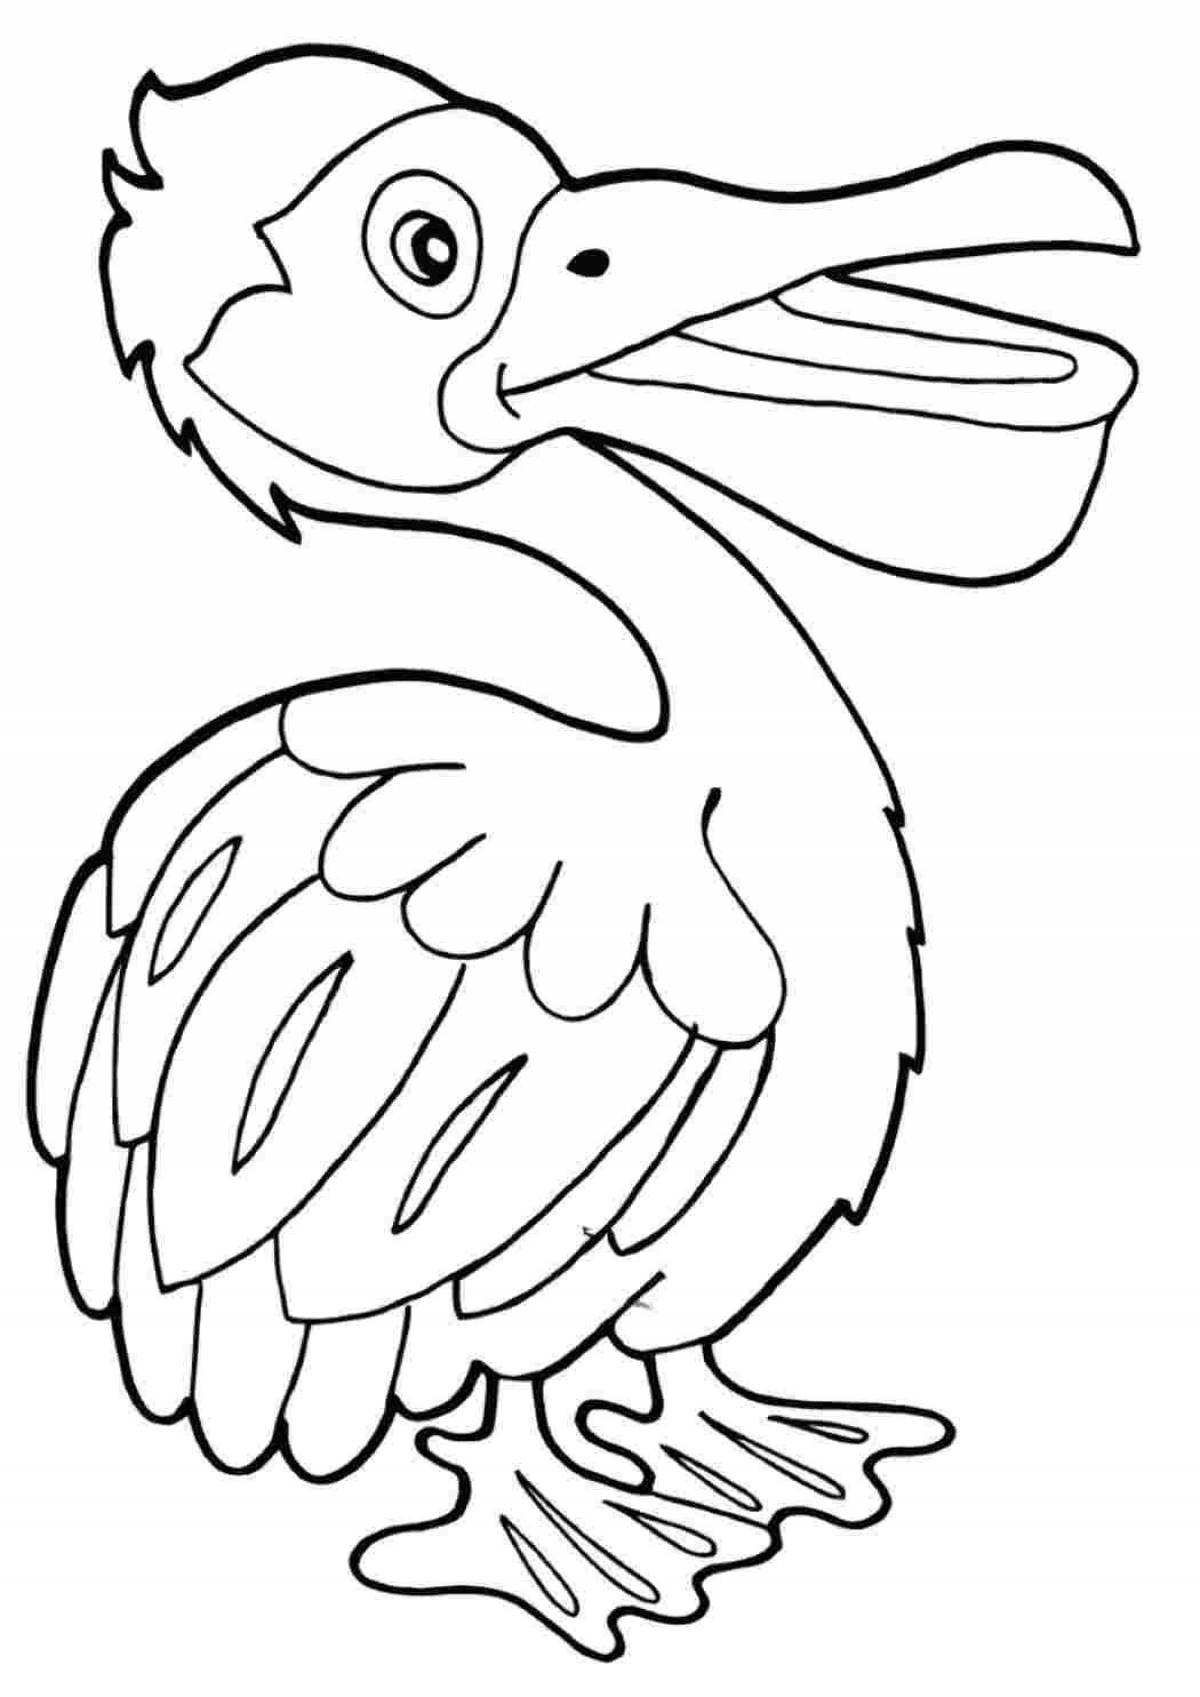 Playful baby pelican coloring page